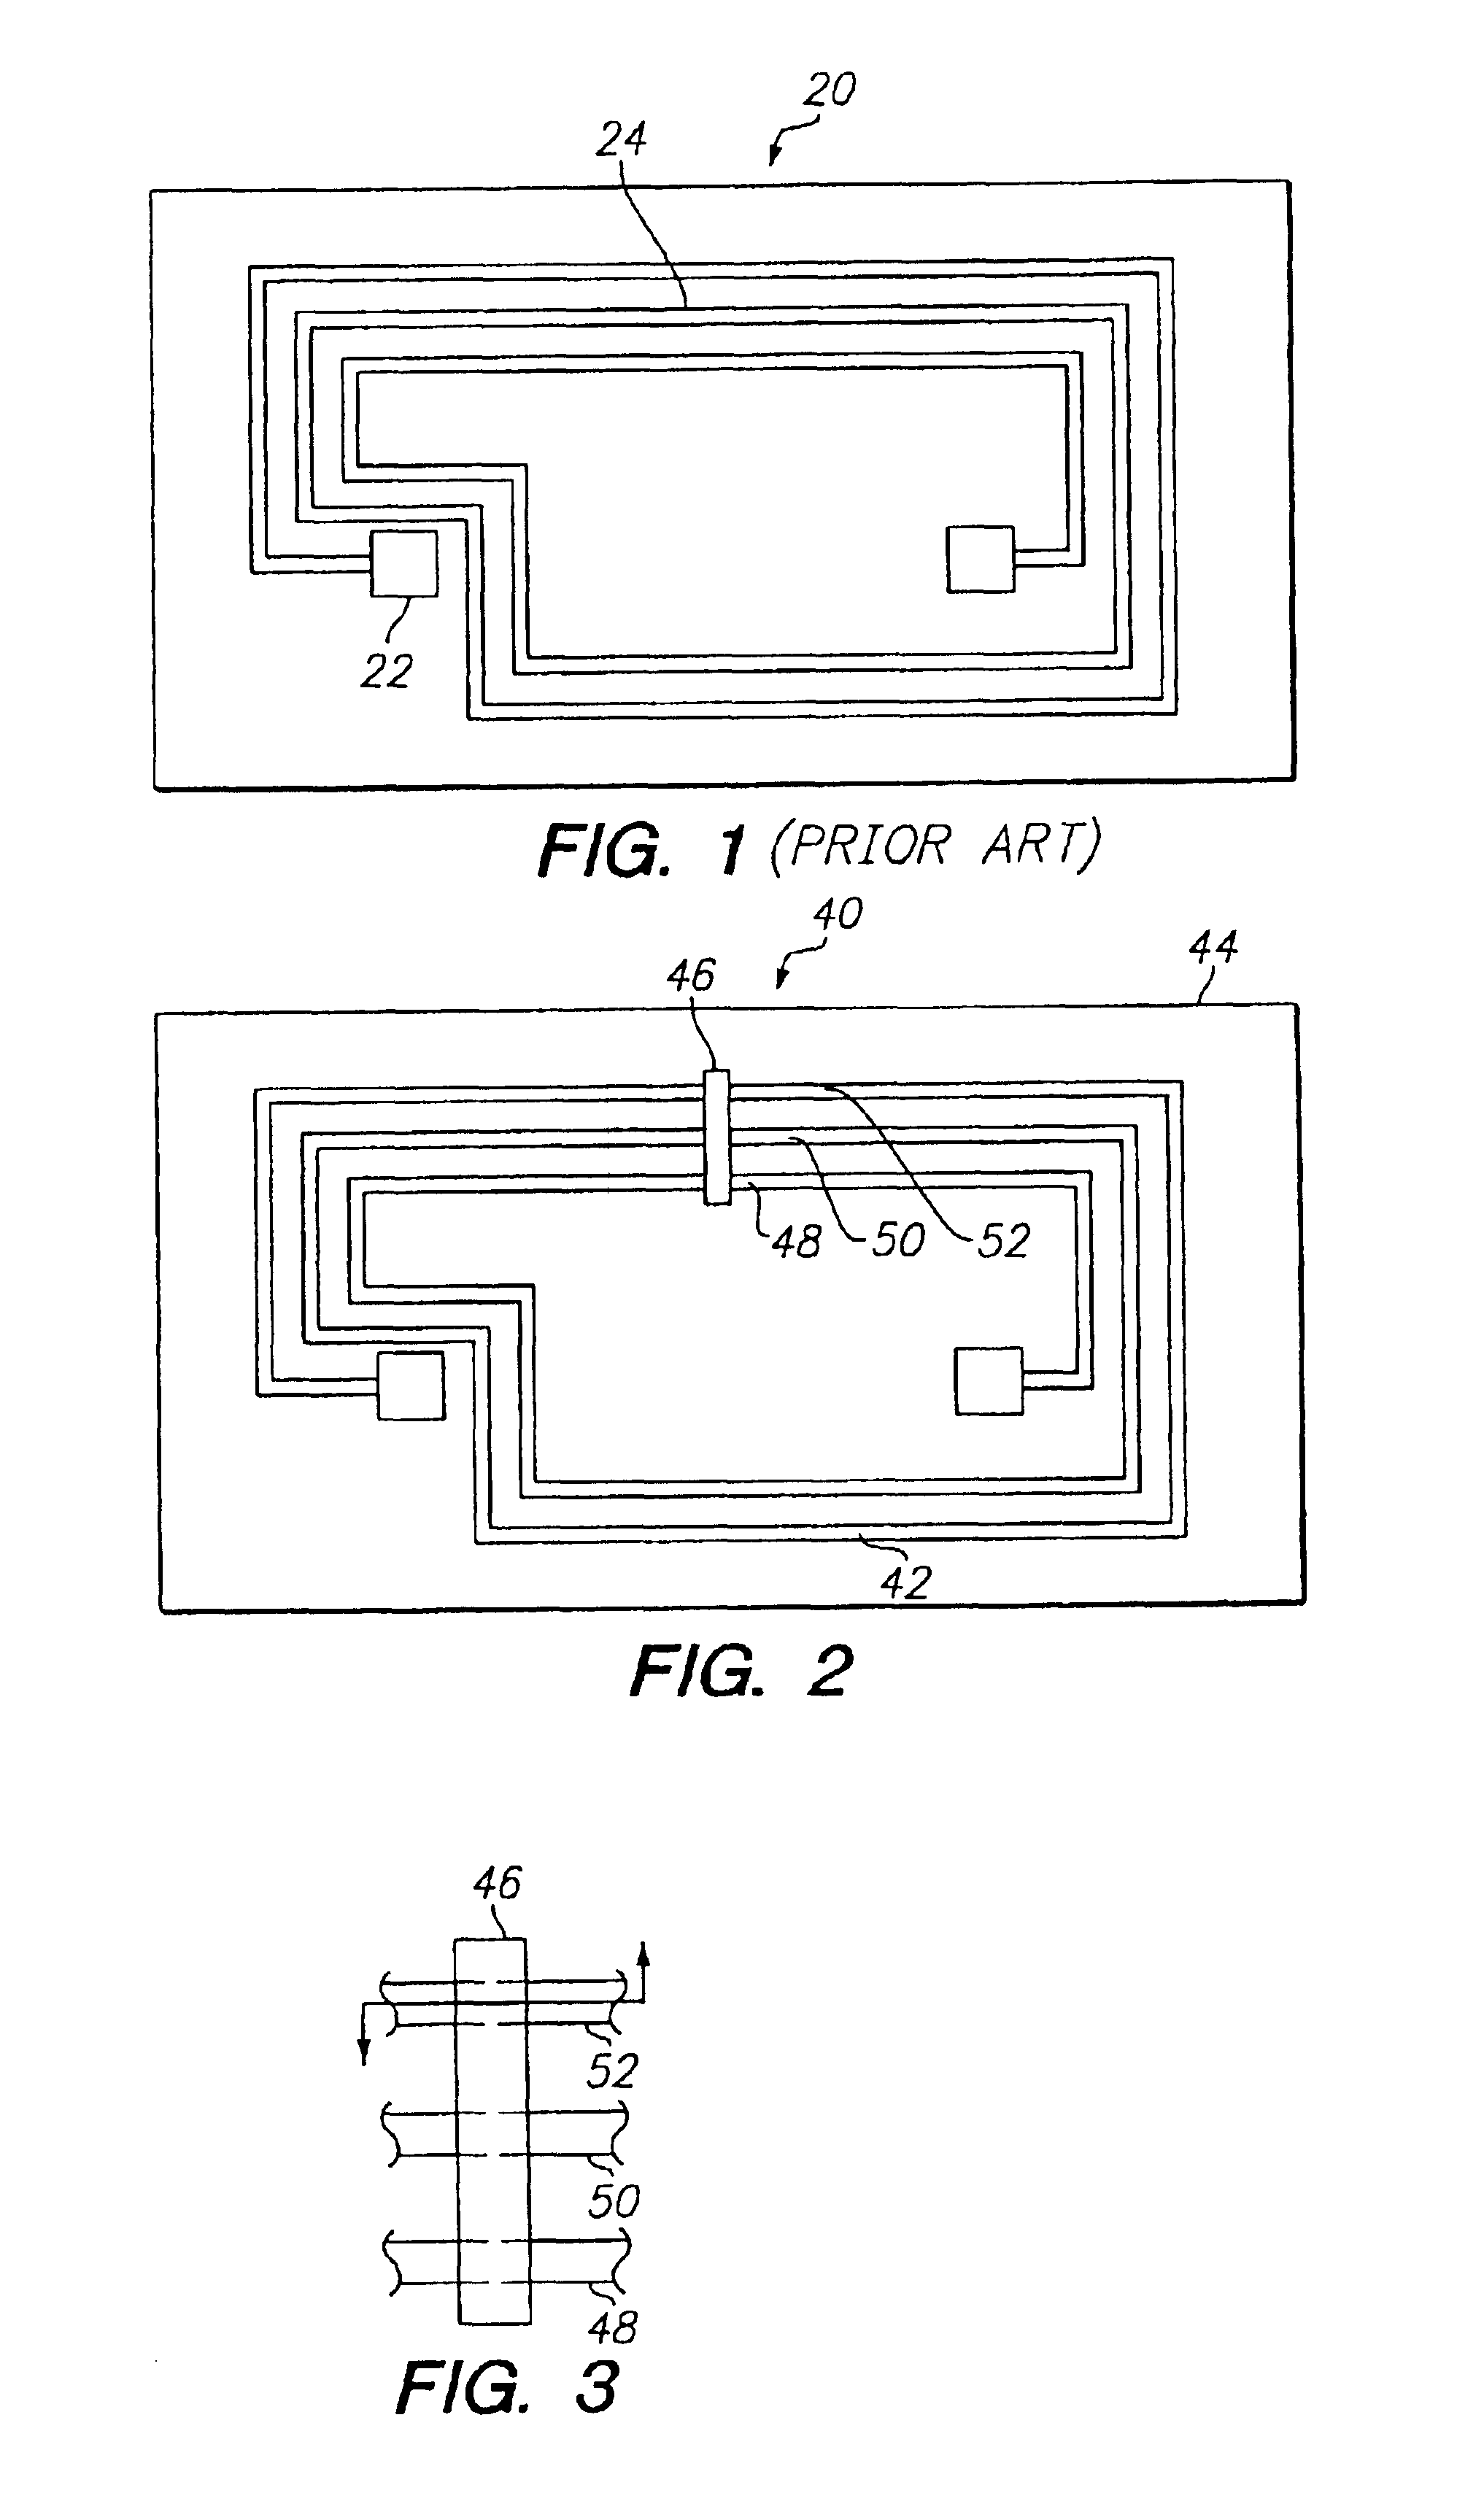 Method for forming radio frequency antenna